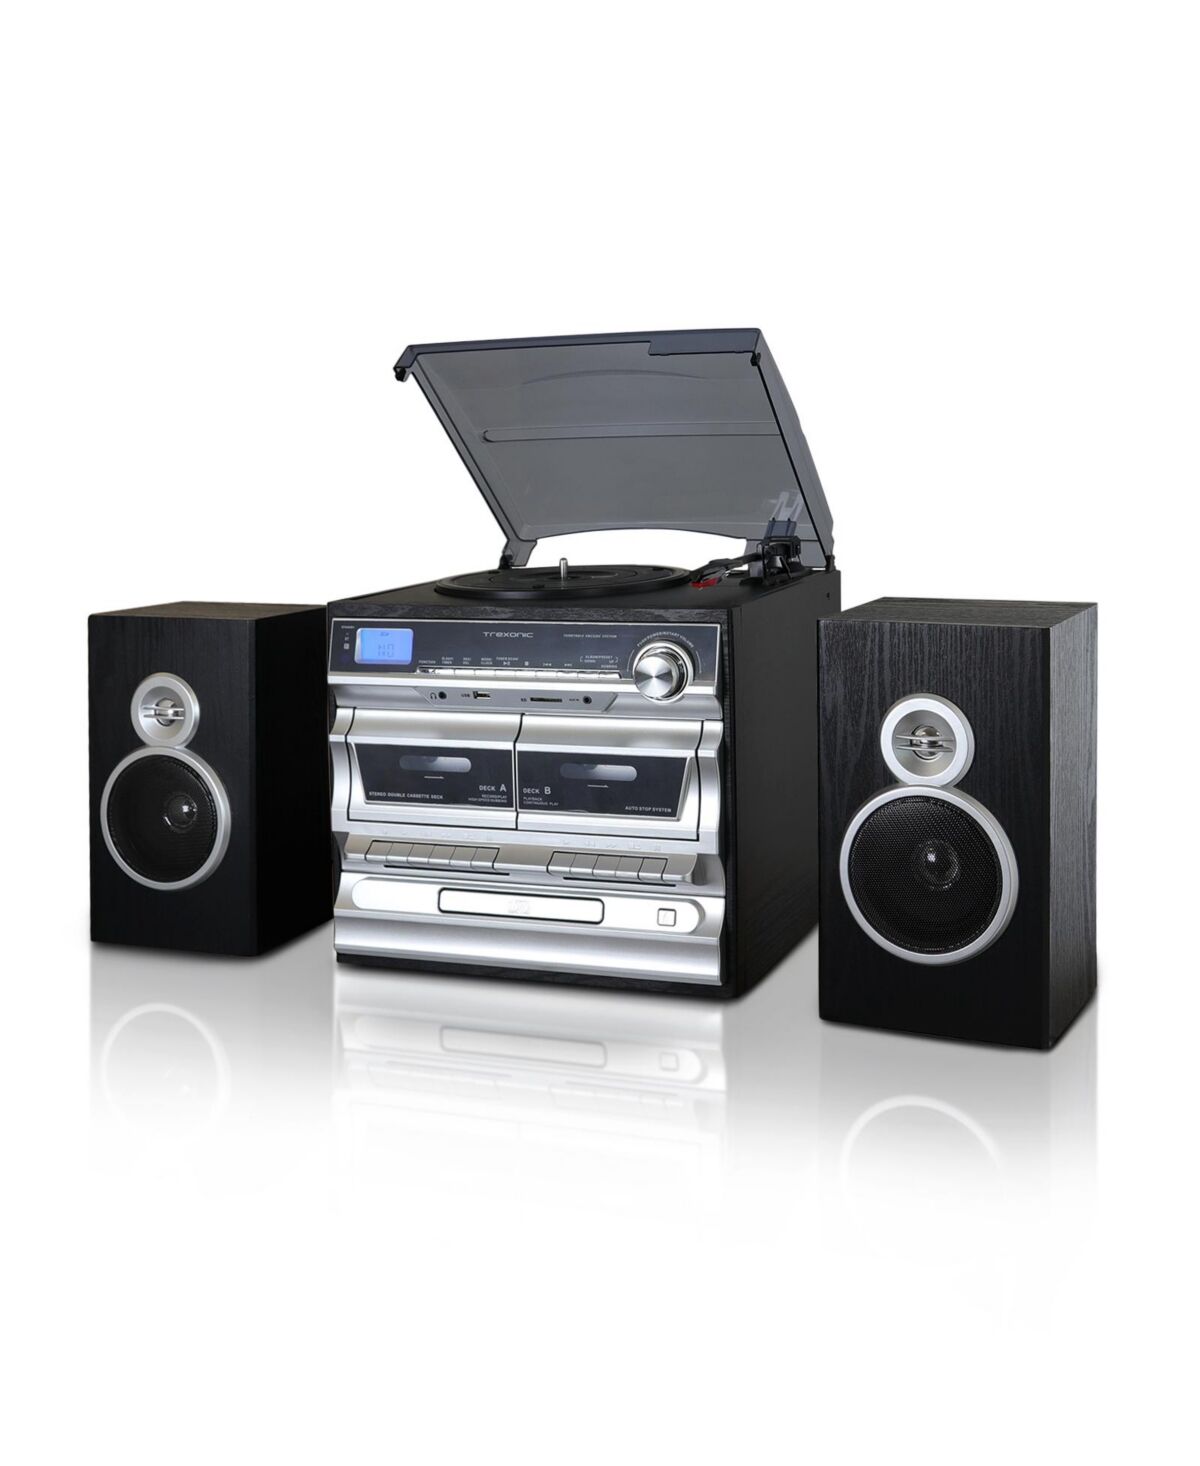 Trexonic 3-Speed Vinyl Turntable Home Stereo System with Cd Player - Black